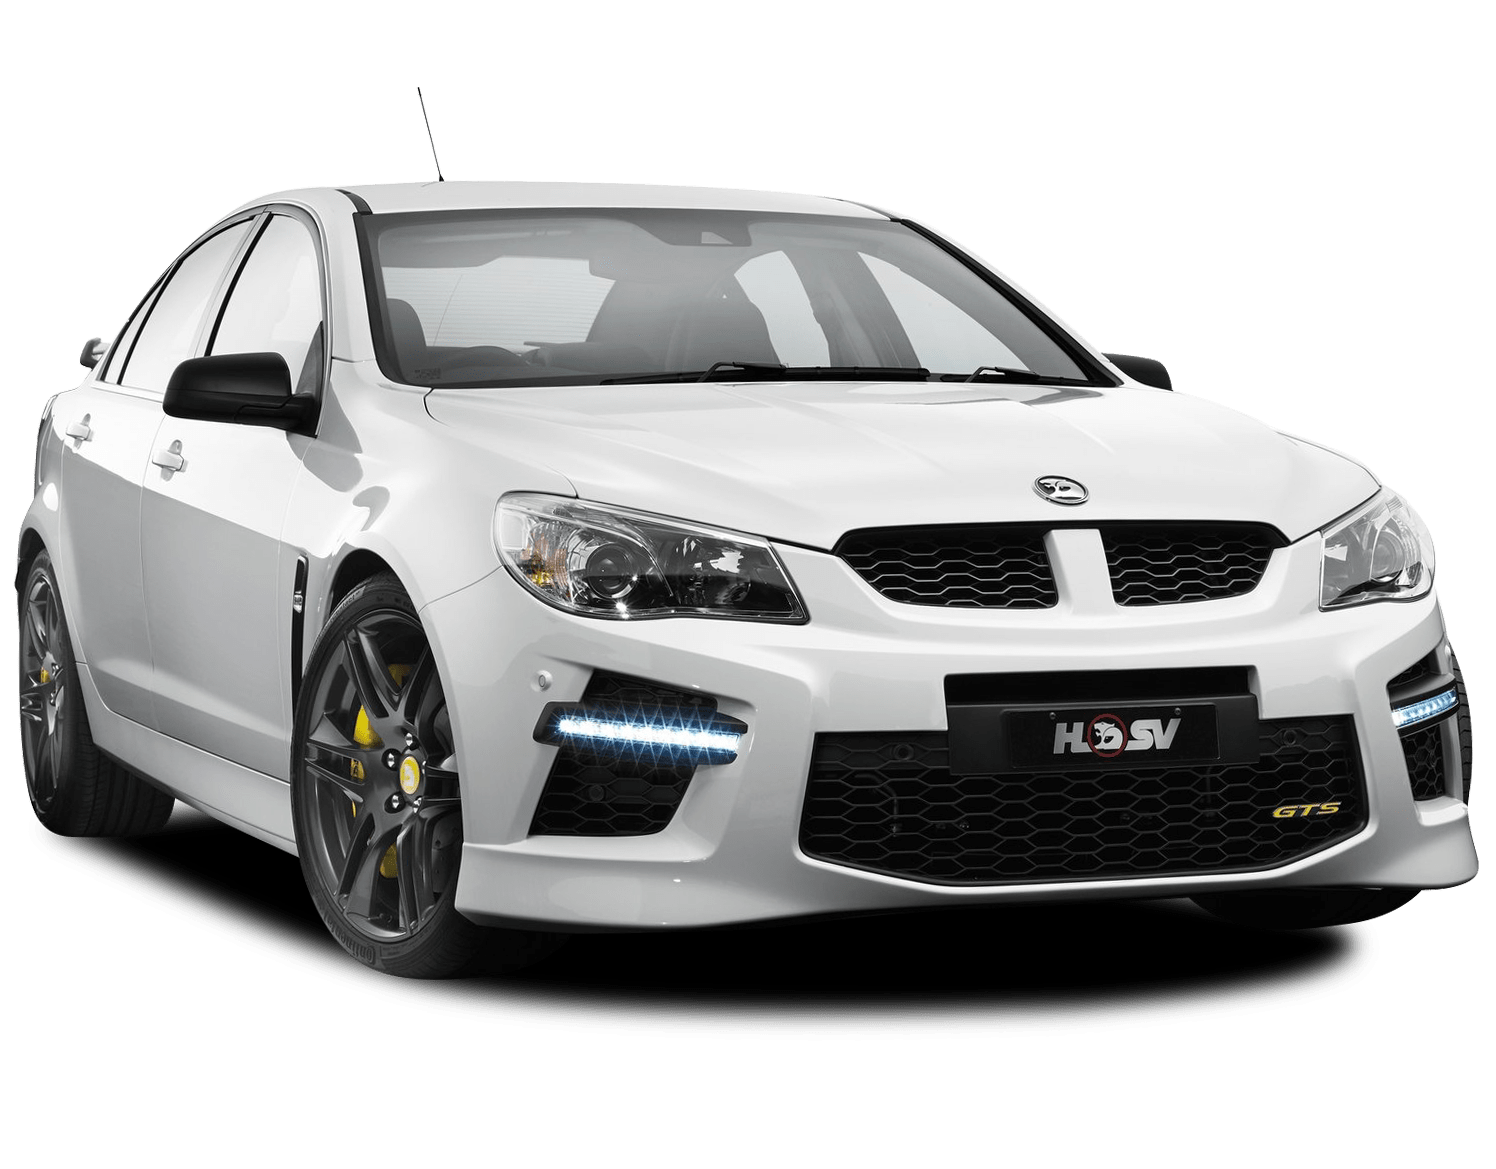 HSV GTS Review, For Sale, Price, Specs & Models  CarsGuide